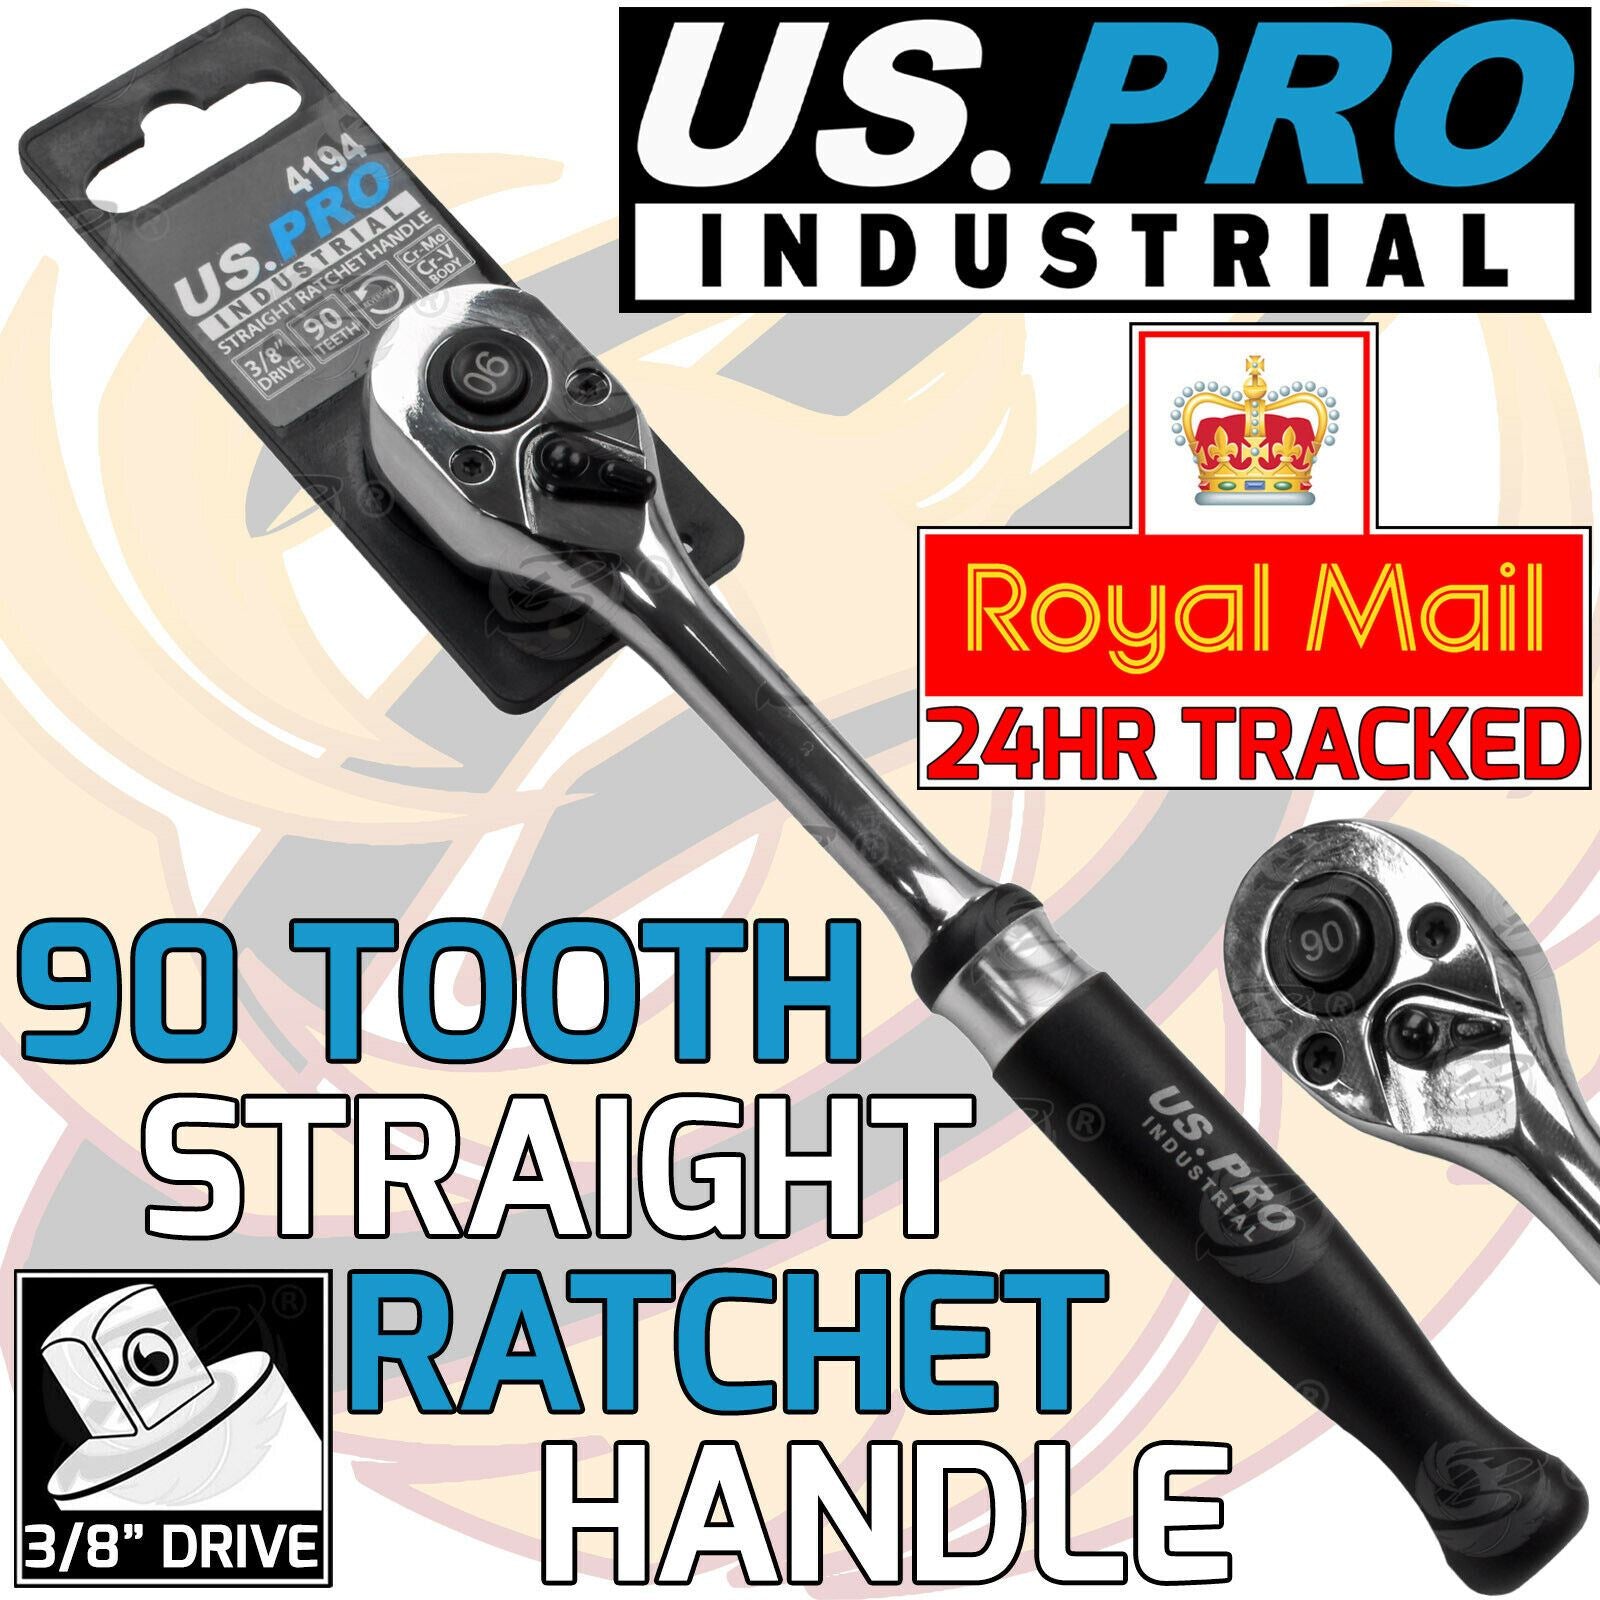 US PRO INDUSTRIAL 3/8" DRIVE 90 TOOTH RATCHET HANDLE